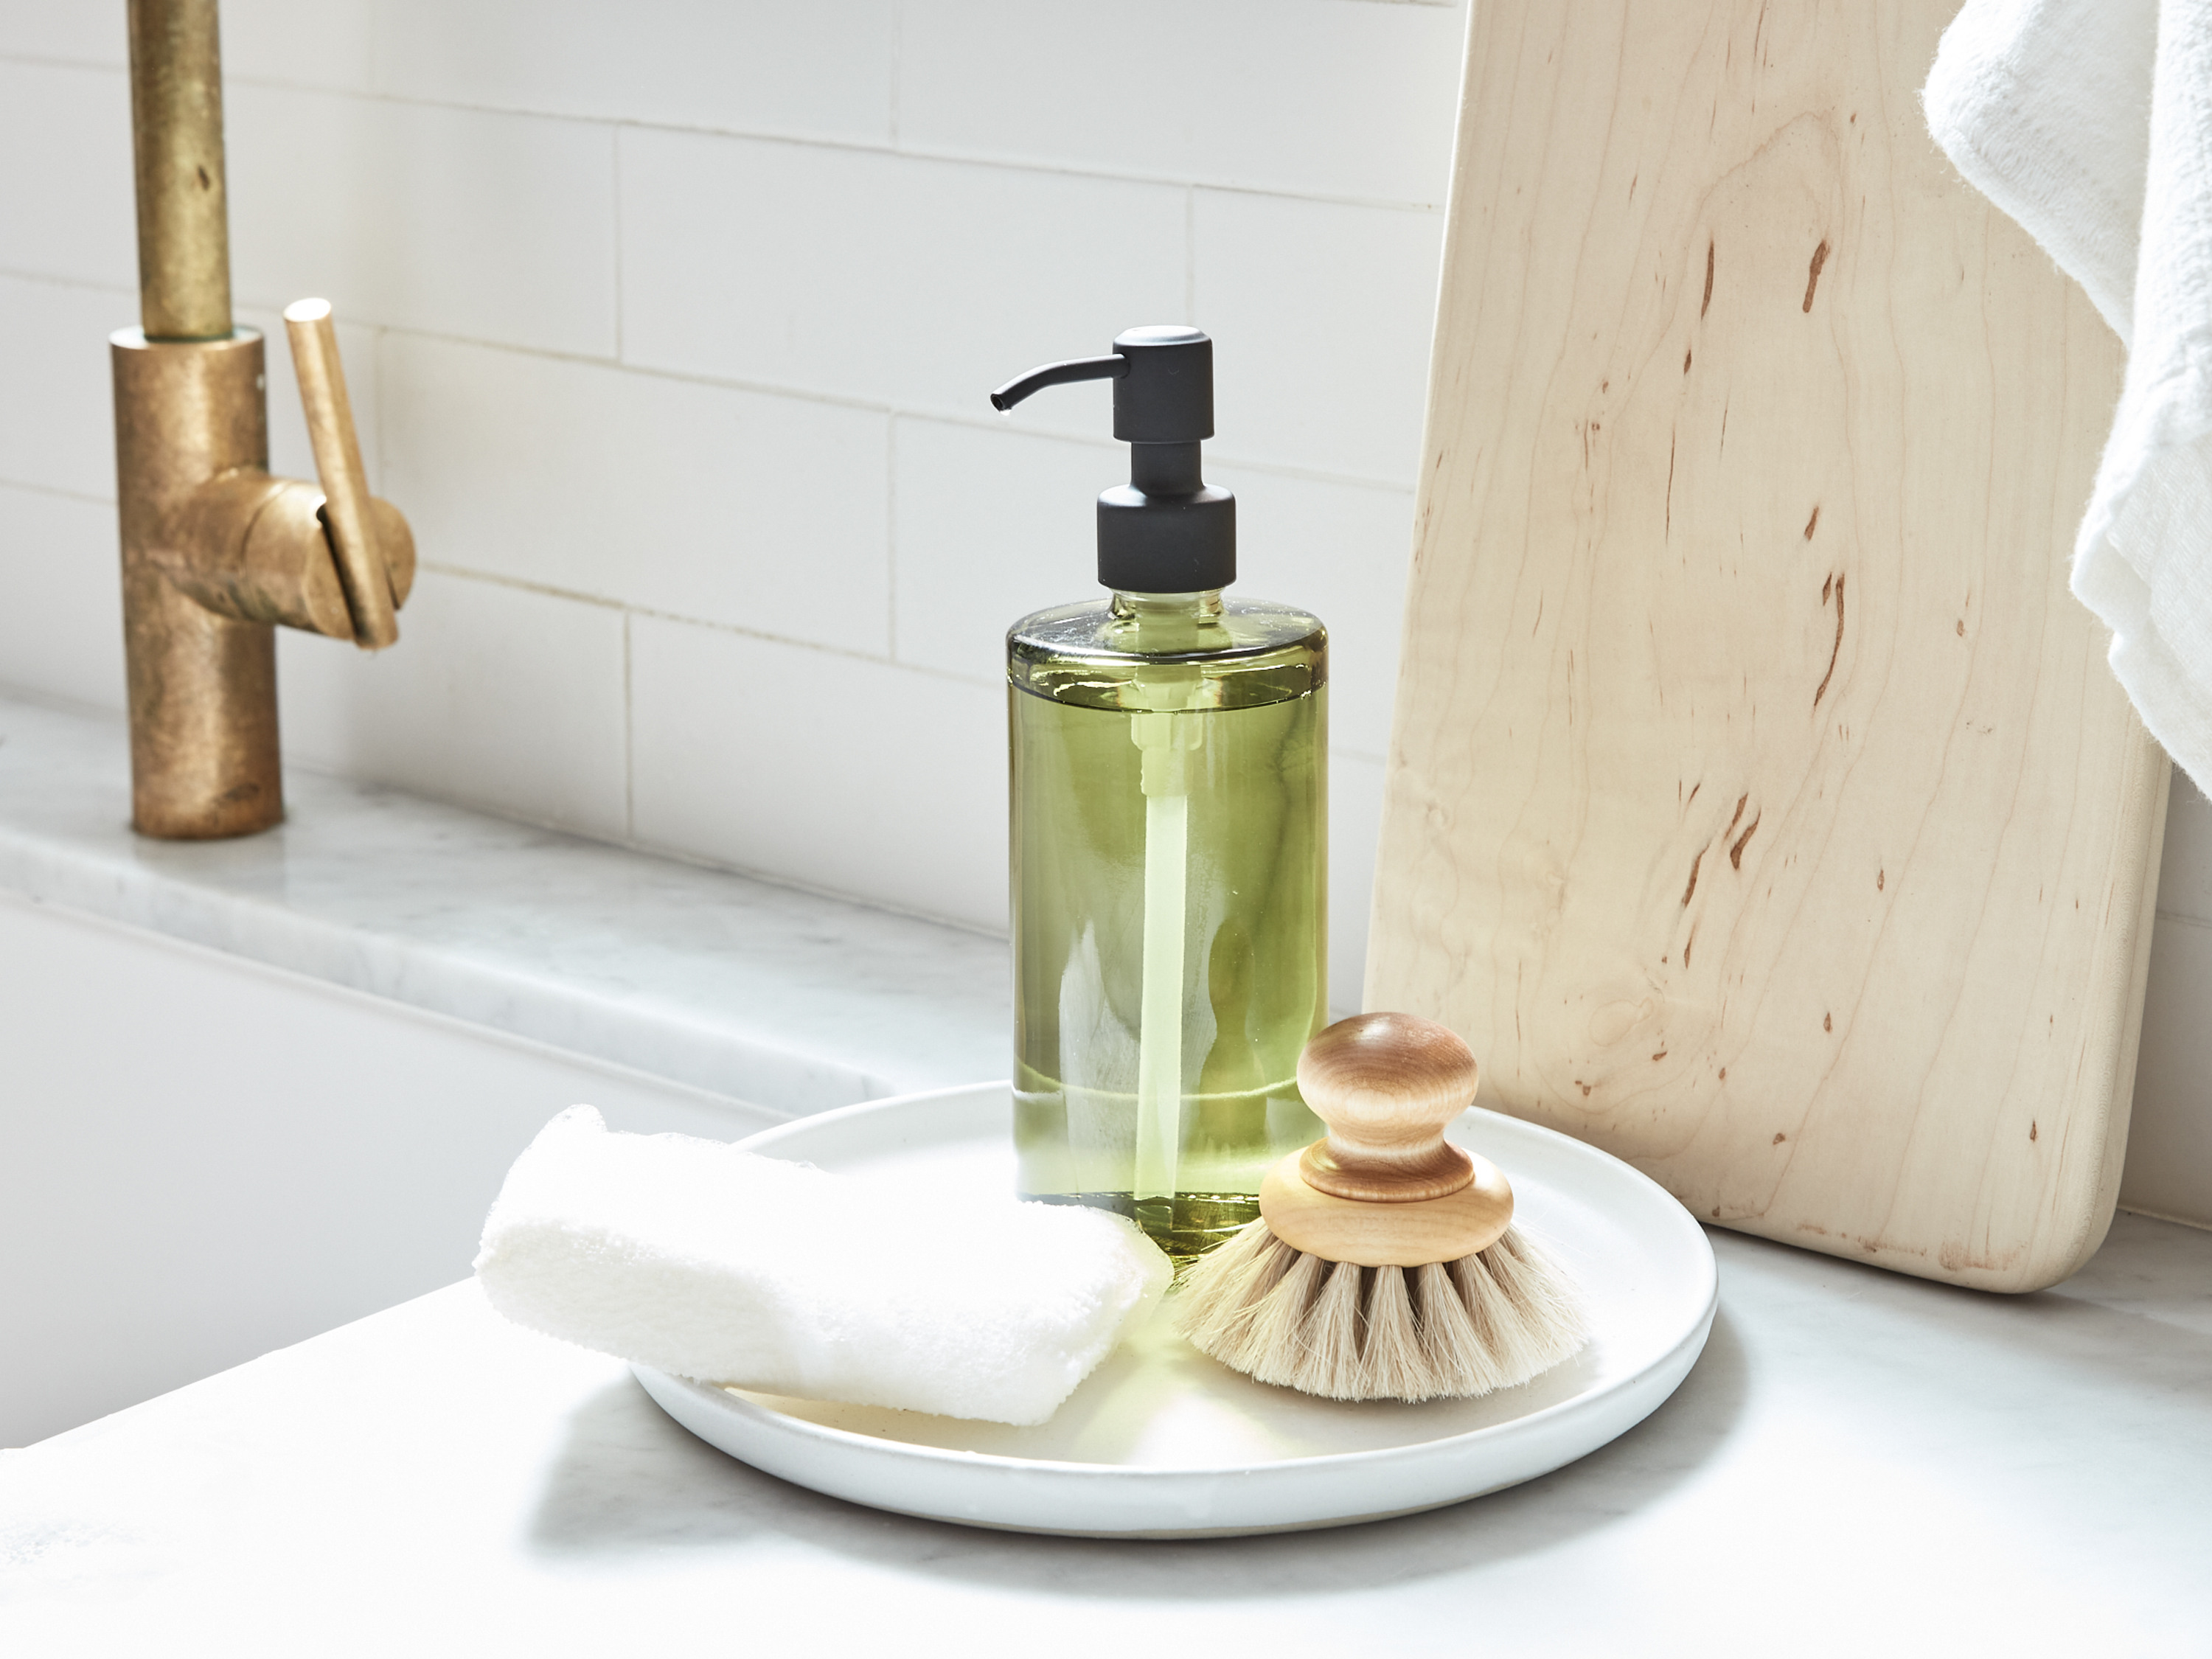 Natural cleaning products displayed on a kitchen counter by the sink.